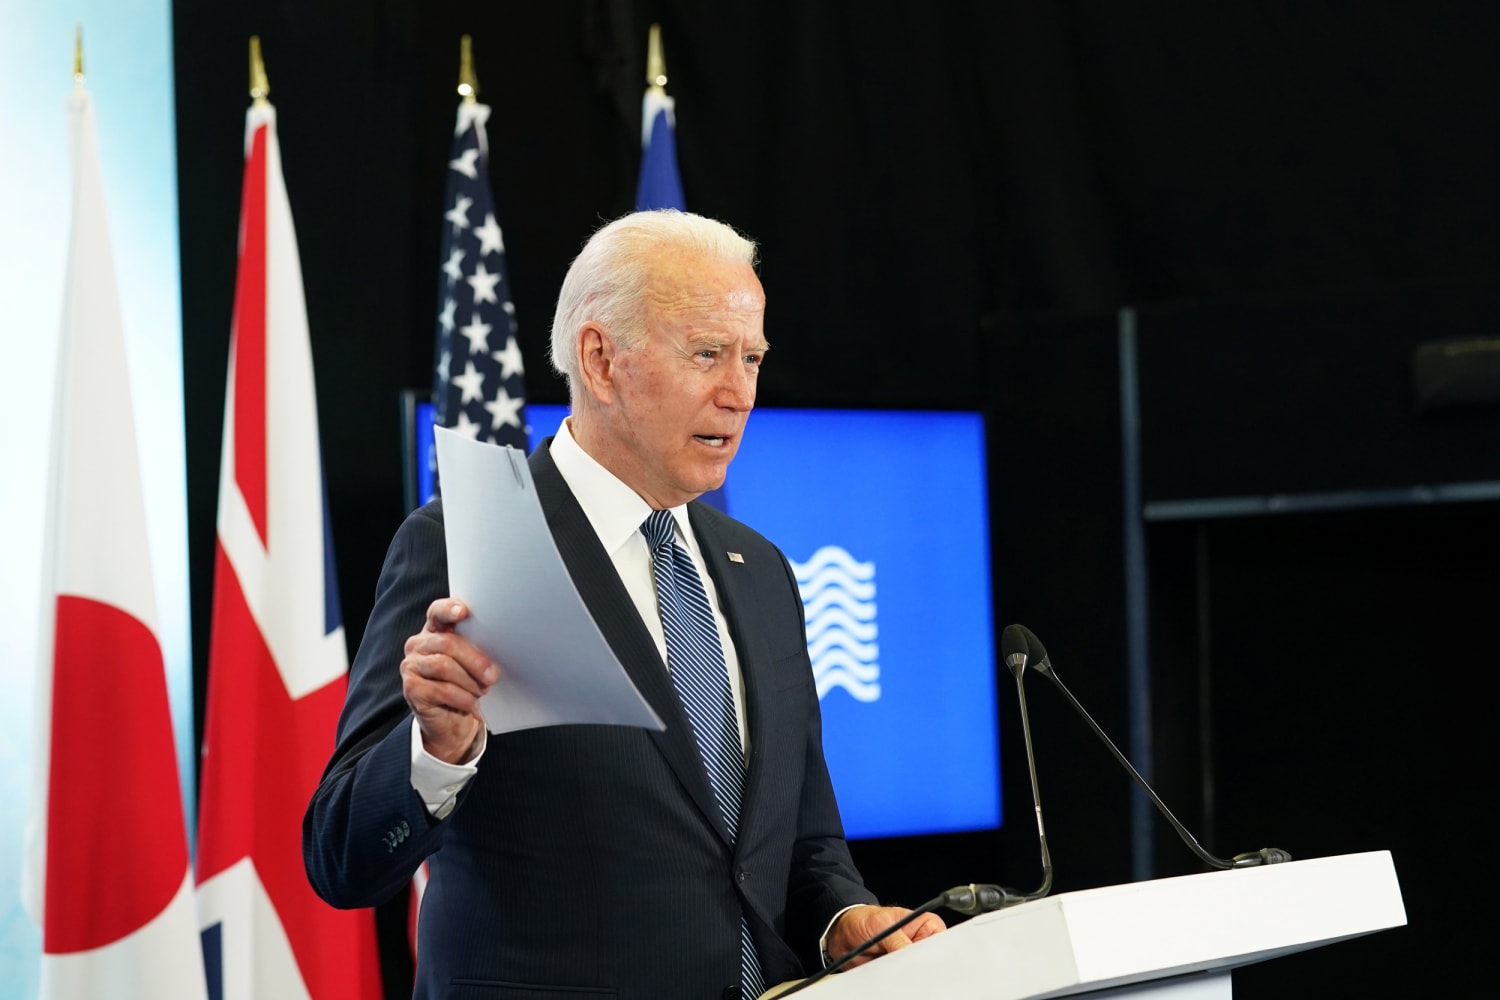 Biden agrees U.S.-Russian relations are at a 'low point' ahead of meeting  with Putin